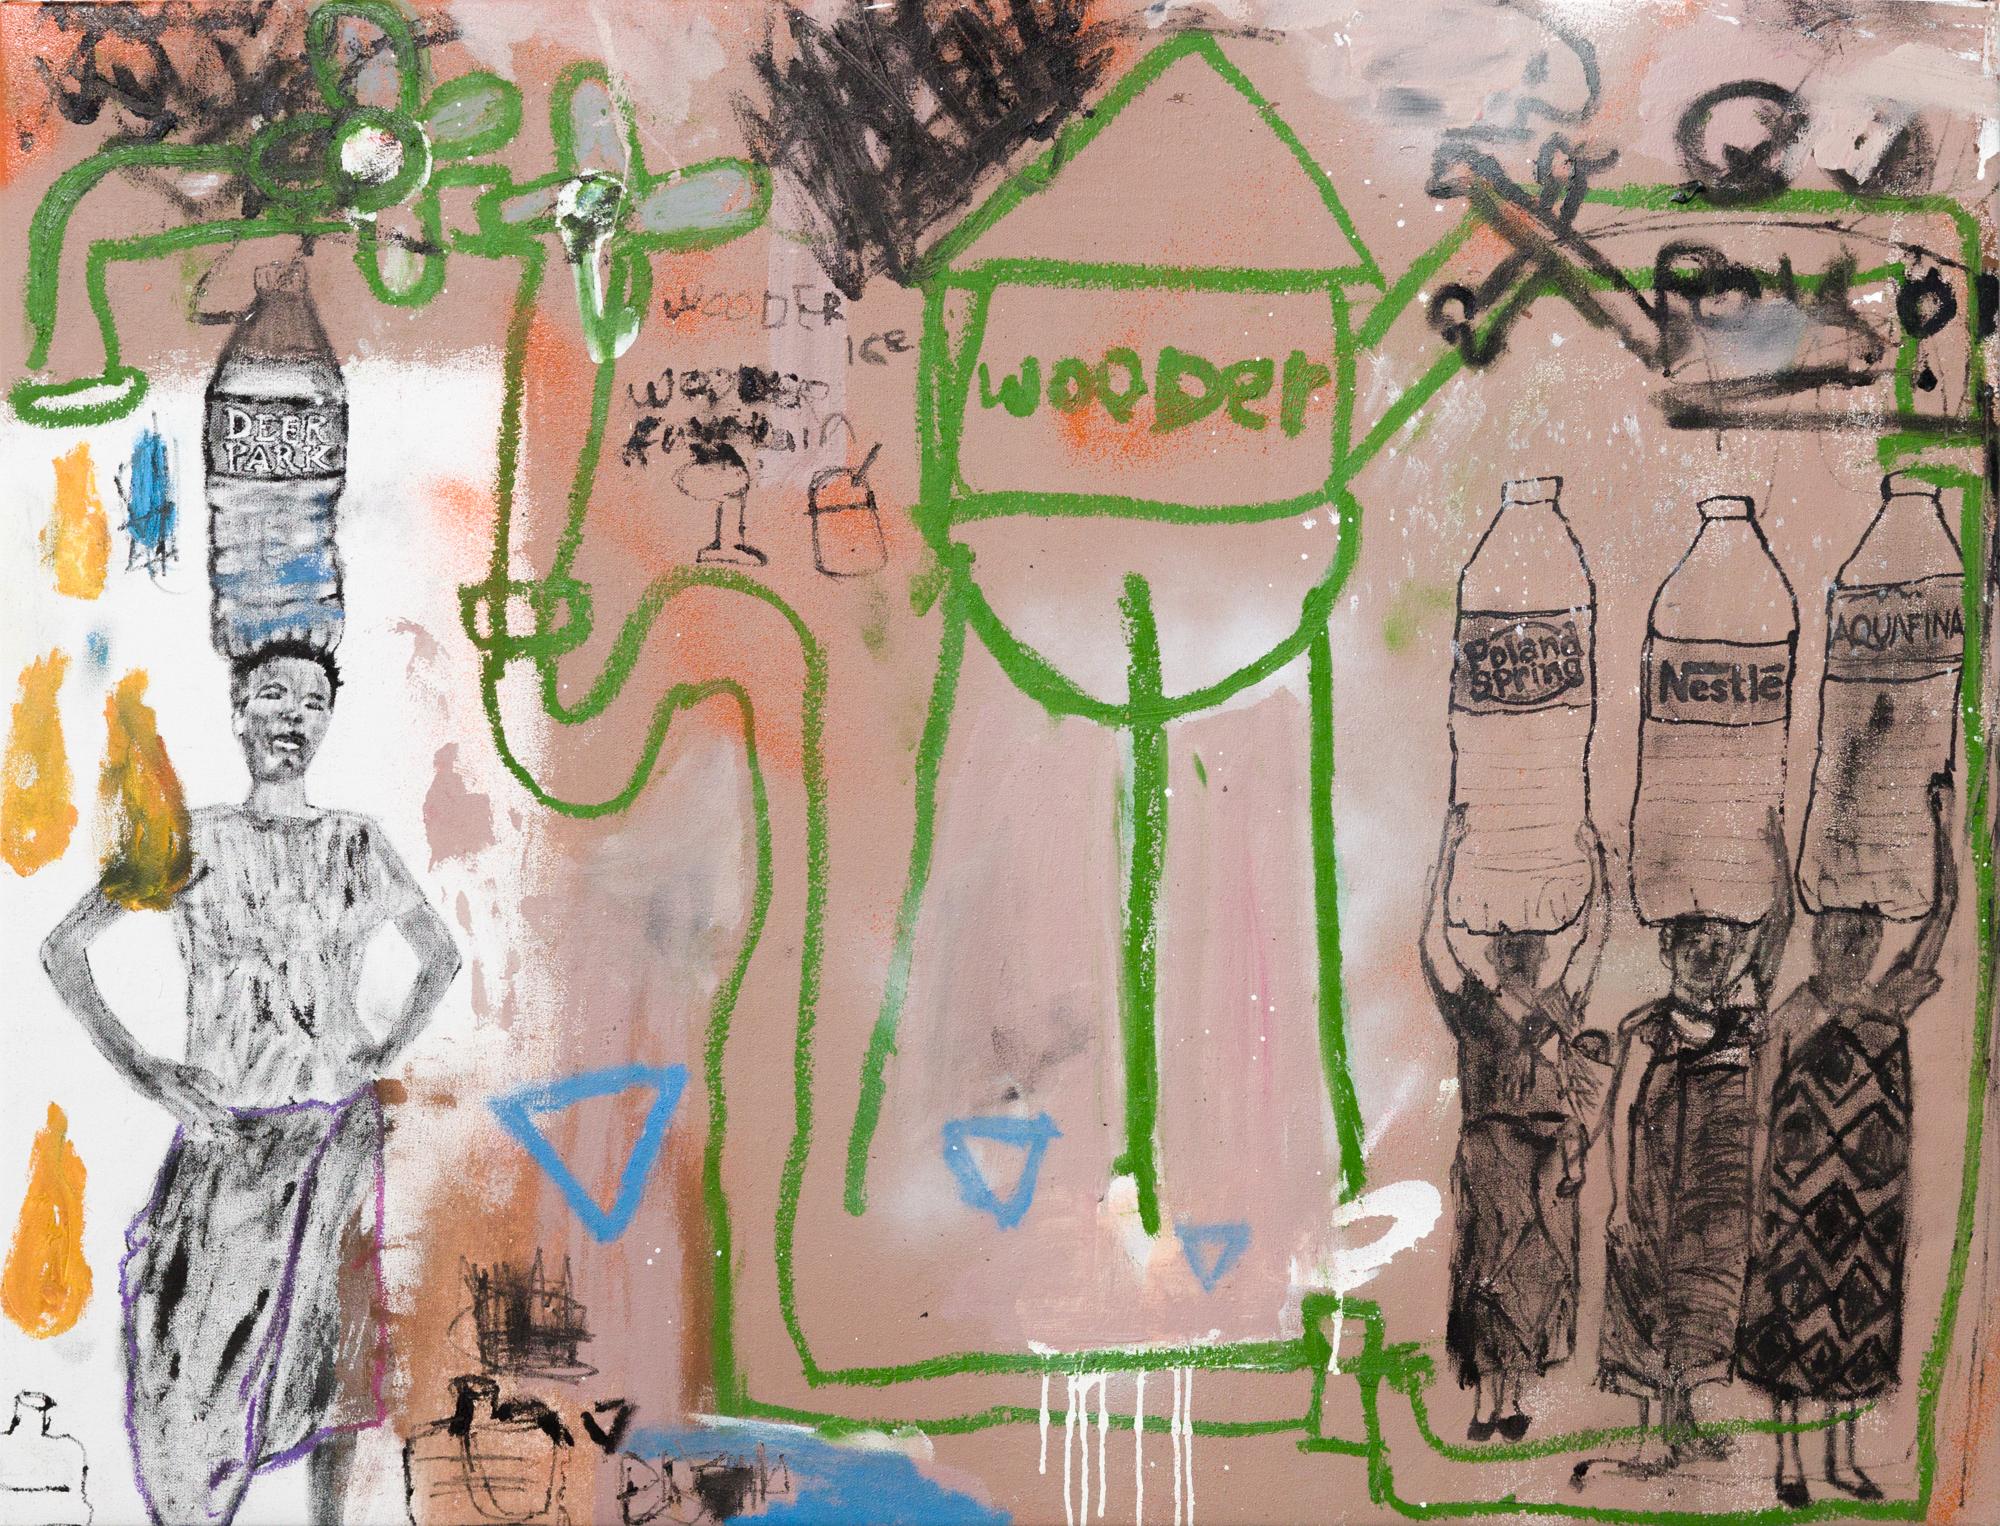 "Third World Tendencies",  Water tower, urban, figures, culturla commentary - Mixed Media Art by Caff Adeus